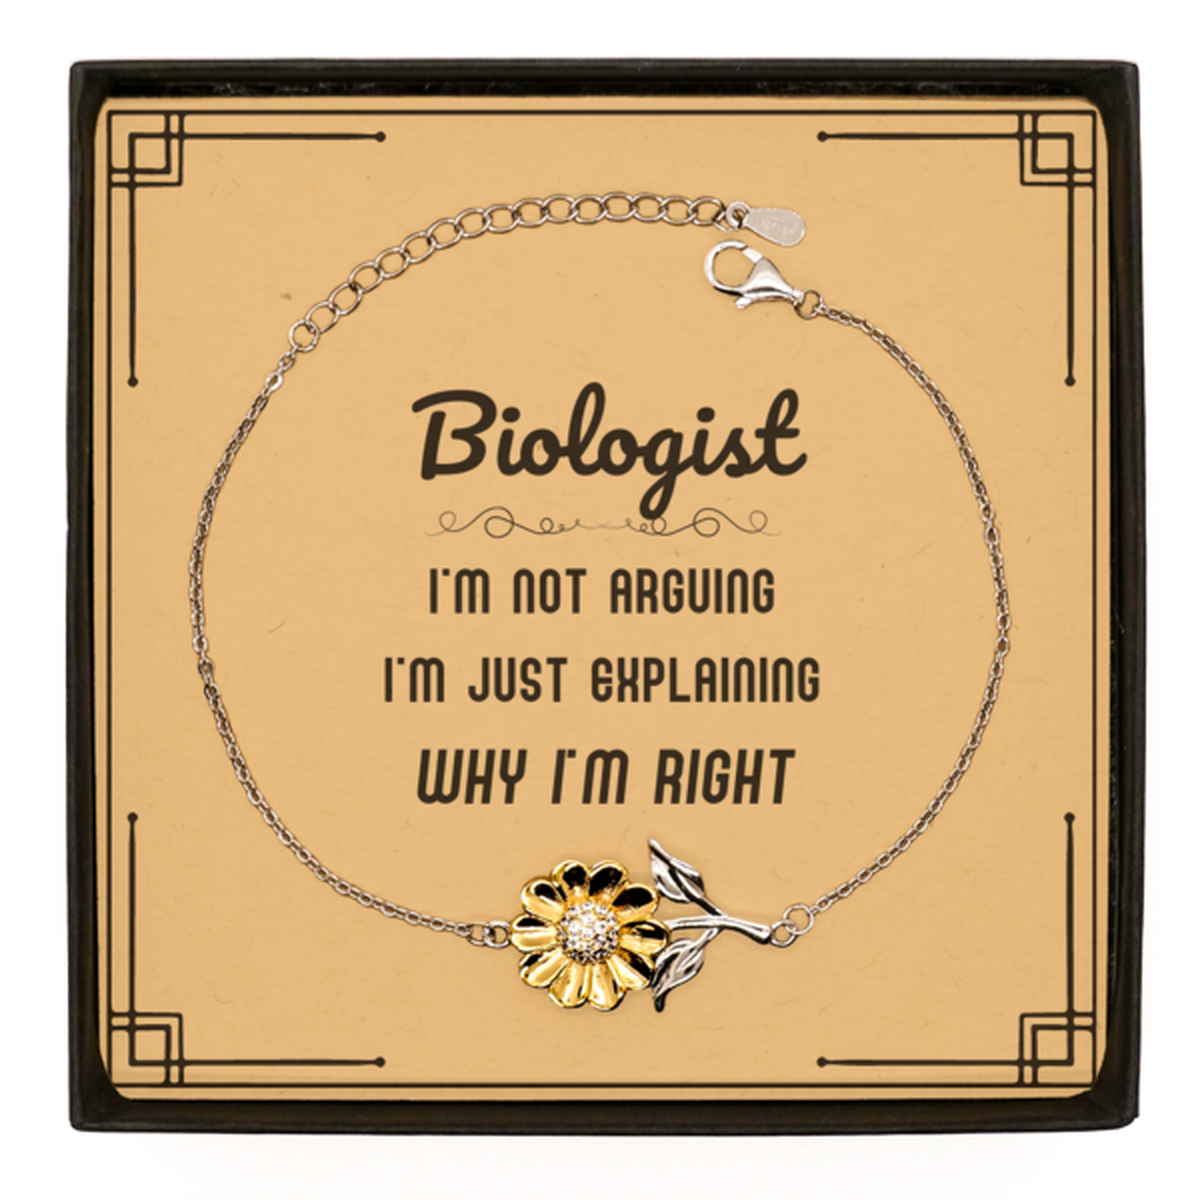 Biologist I'm not Arguing. I'm Just Explaining Why I'm RIGHT Sunflower Bracelet, Funny Saying Quote Biologist Gifts For Biologist Message Card Graduation Birthday Christmas Gifts for Men Women Coworker